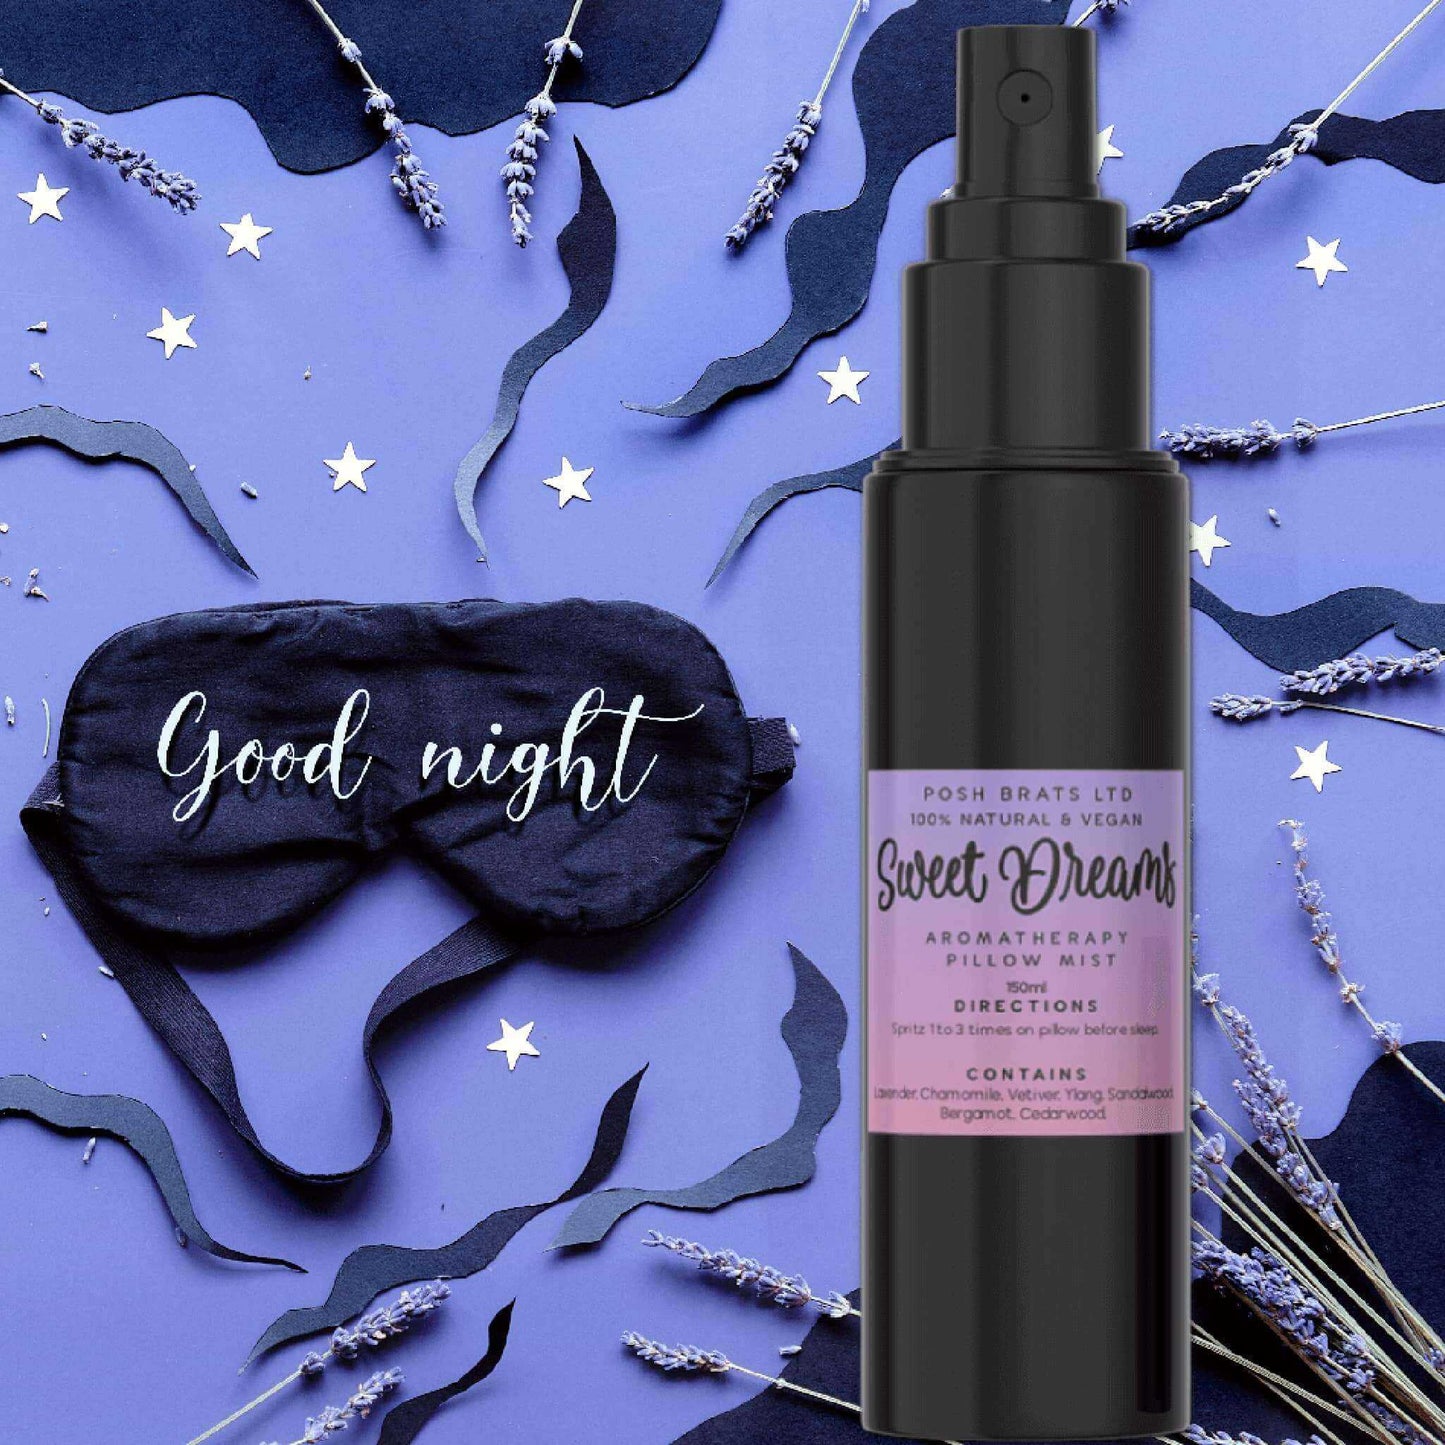 Experience tranquility with the Sweet Dreams Pillow Mist, crafted with magnesium for deep, restful sleep.